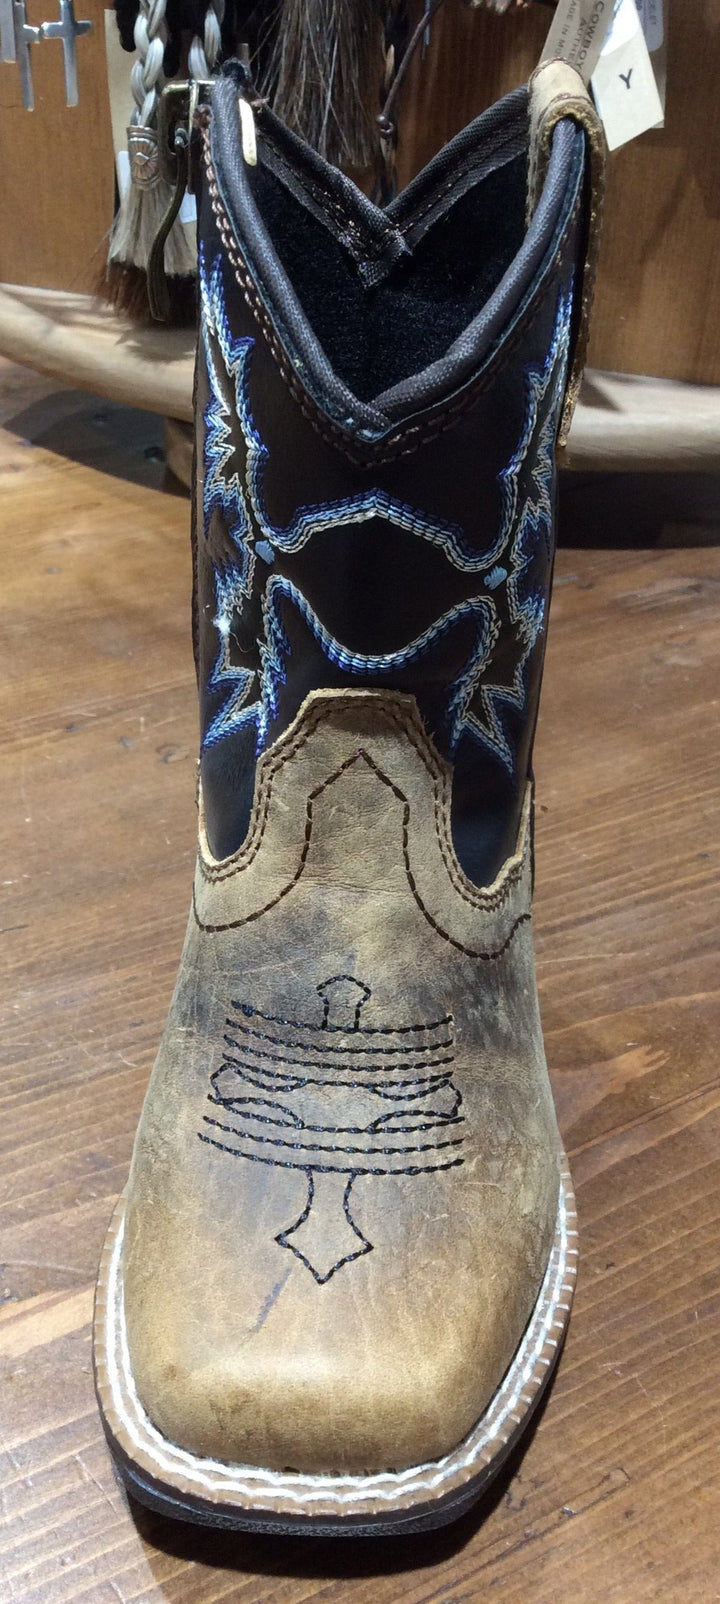 ARIAT LIL'STOMPERS "TOMBSTONE" TODDLER BOY'S BOOT